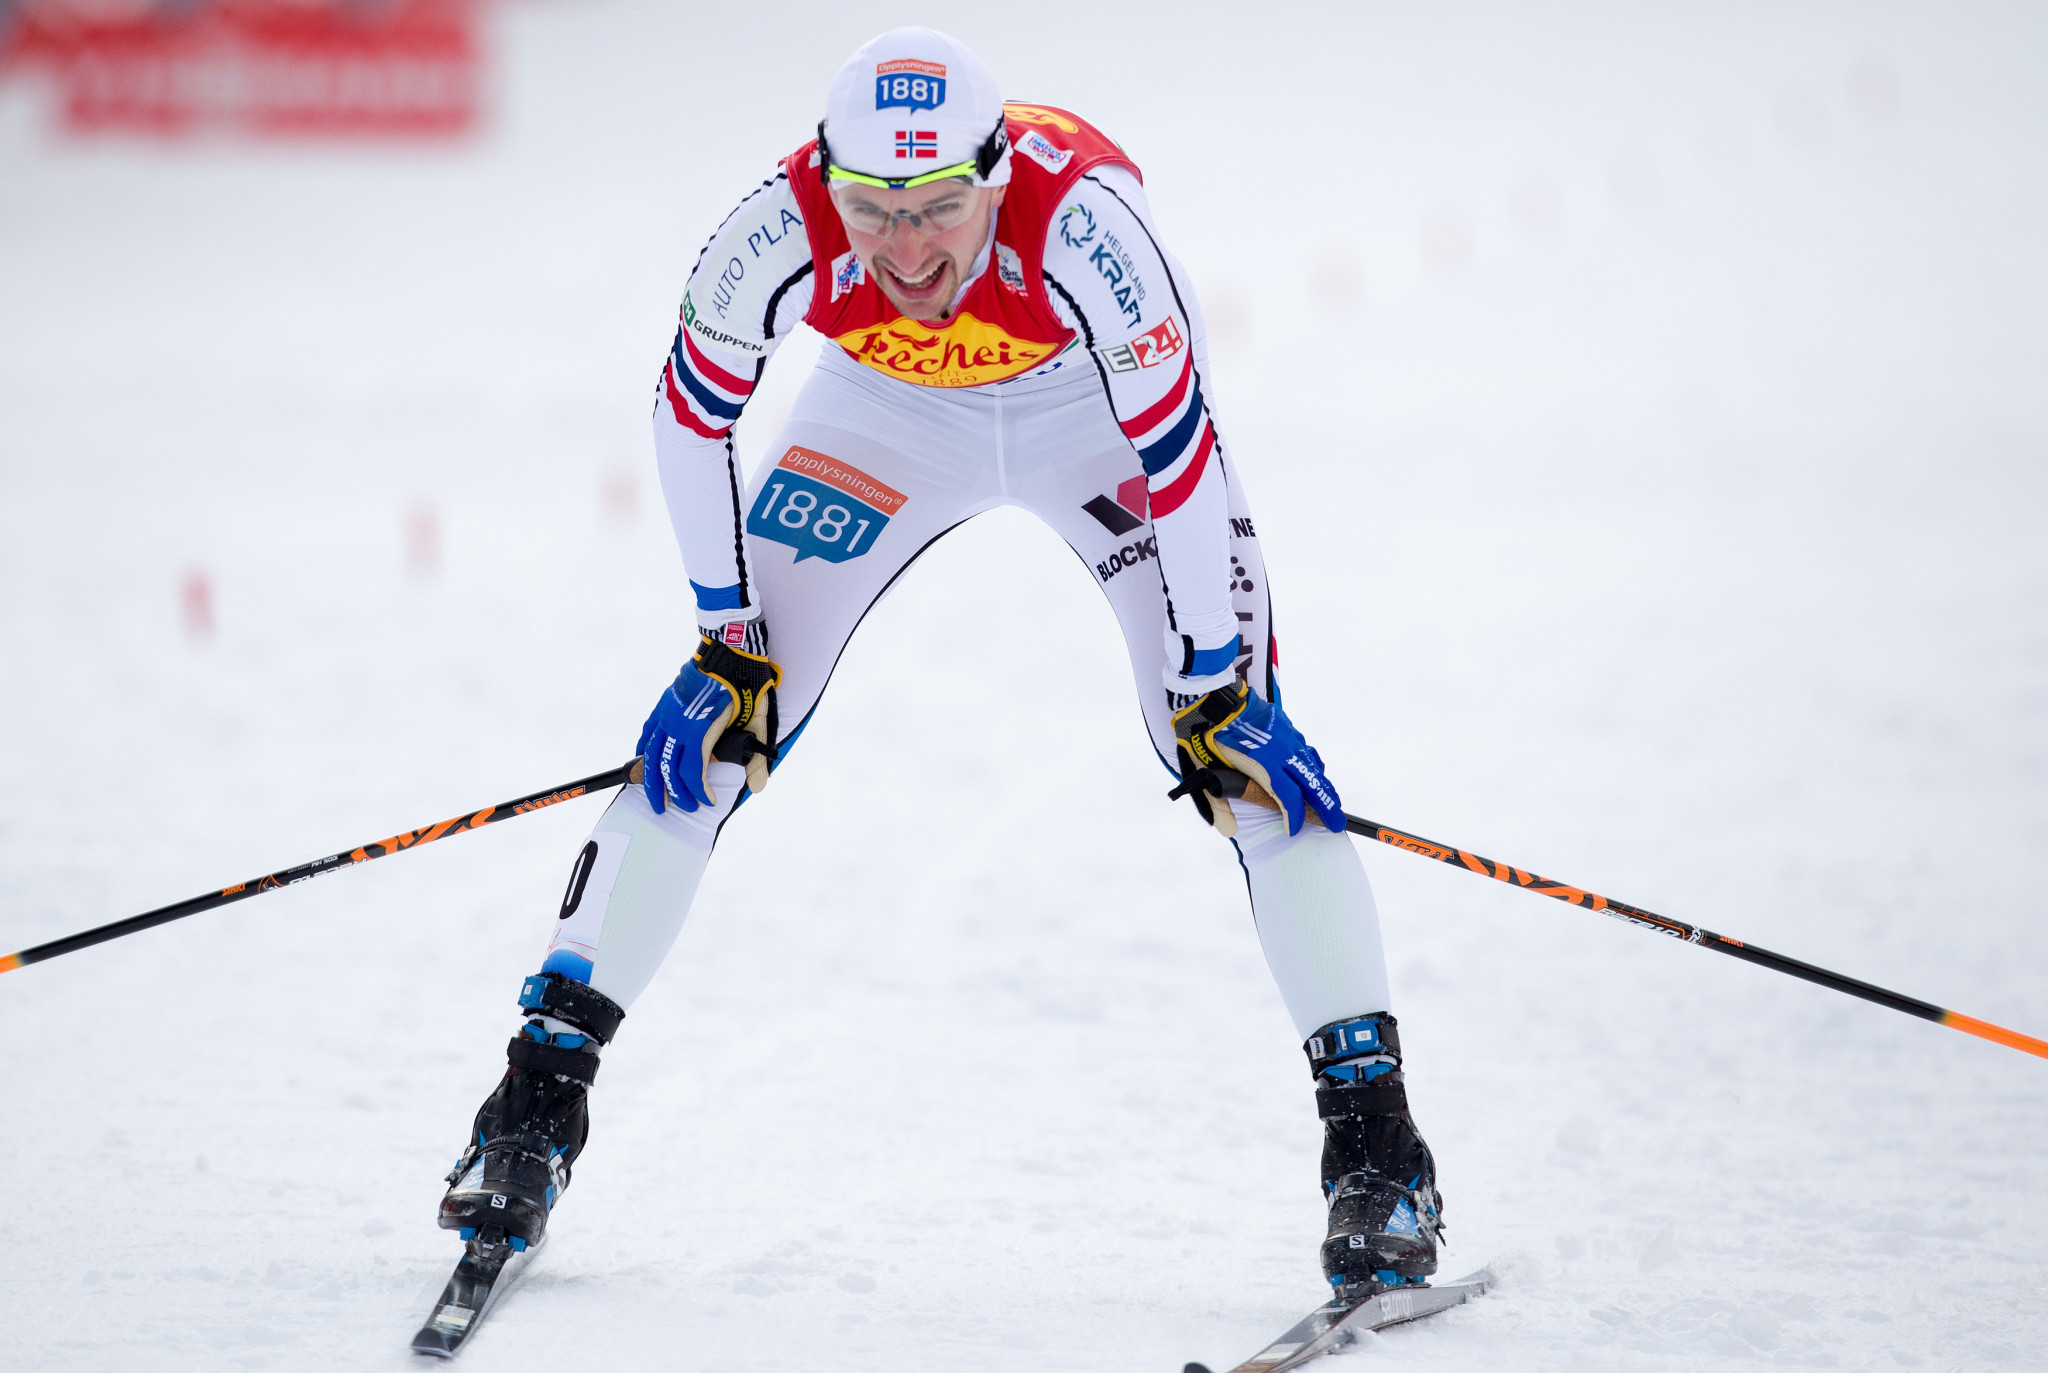 Schmid extends overall lead with victory at FIS Nordic Combined World Cup